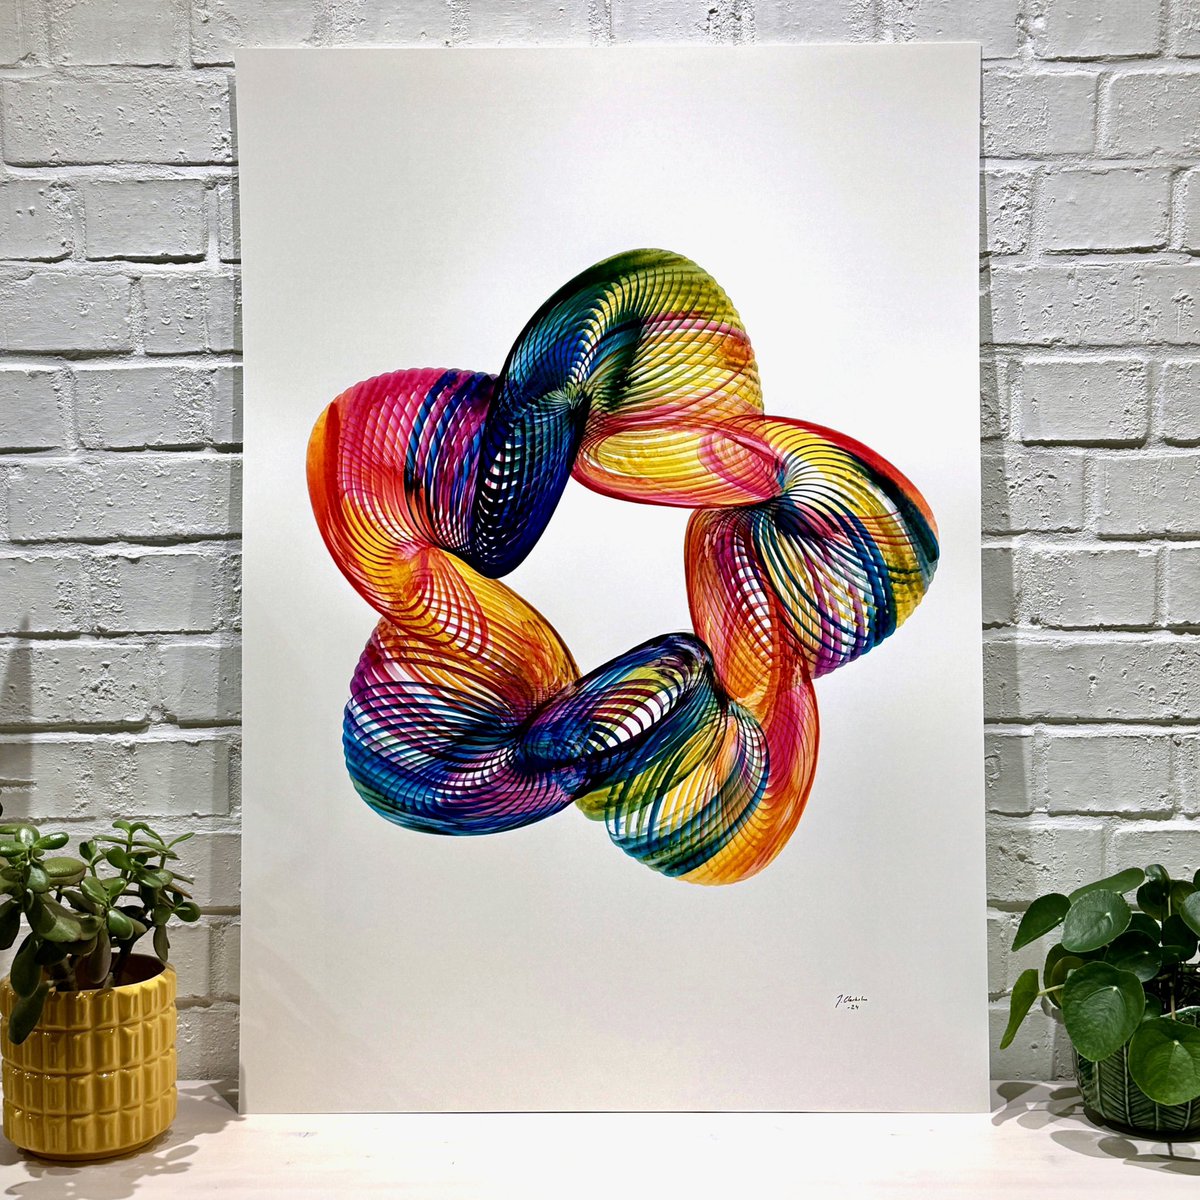 Clown DNA PH Martin Bombay Ink Turquoise, Magenta and Golden Yellow (CMY) on 70x100cm Invercote paperboard. Available in my webshop. #cmy #cmyk #linedrawing #rainbow #ink